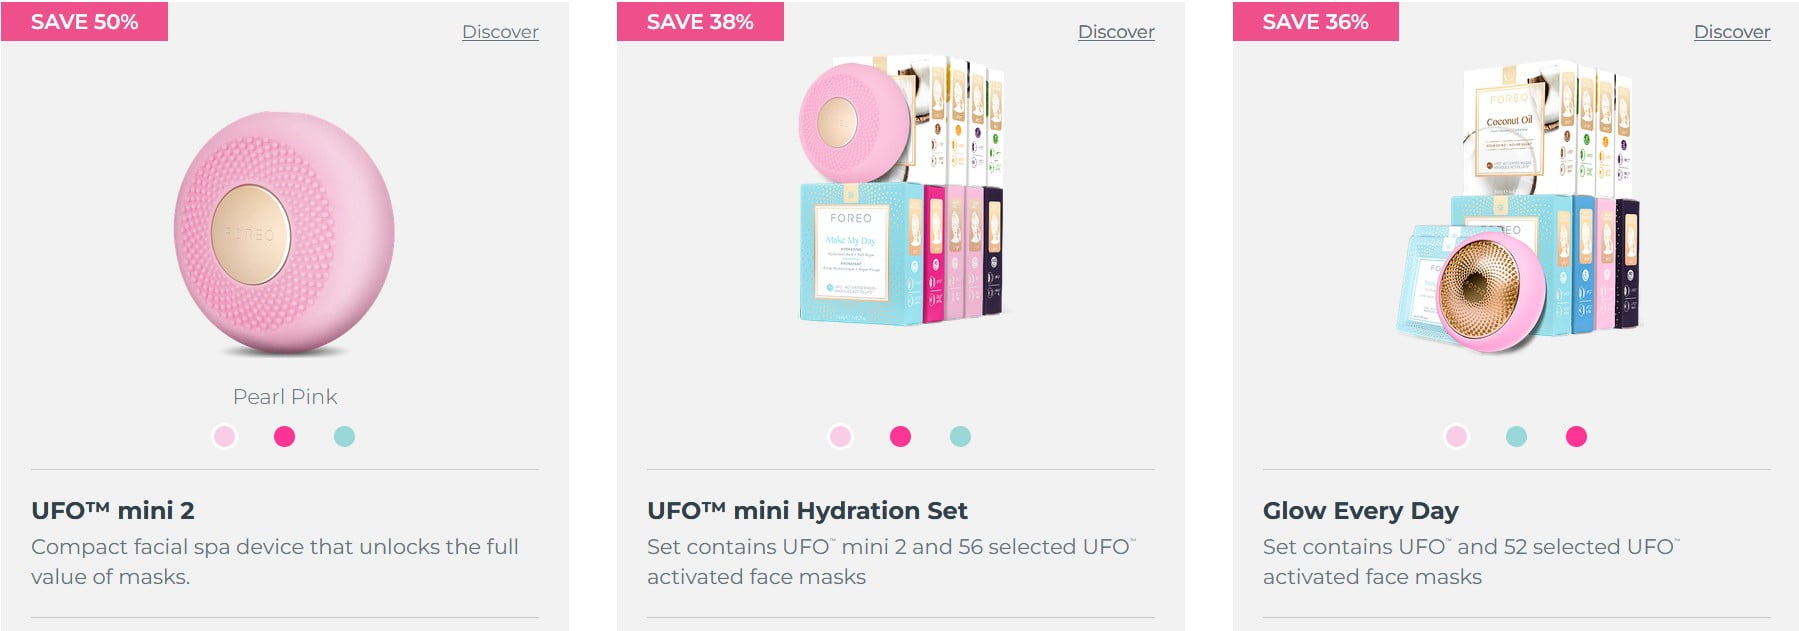 Up to 50% off + an extra 5% sitewide at Foreo